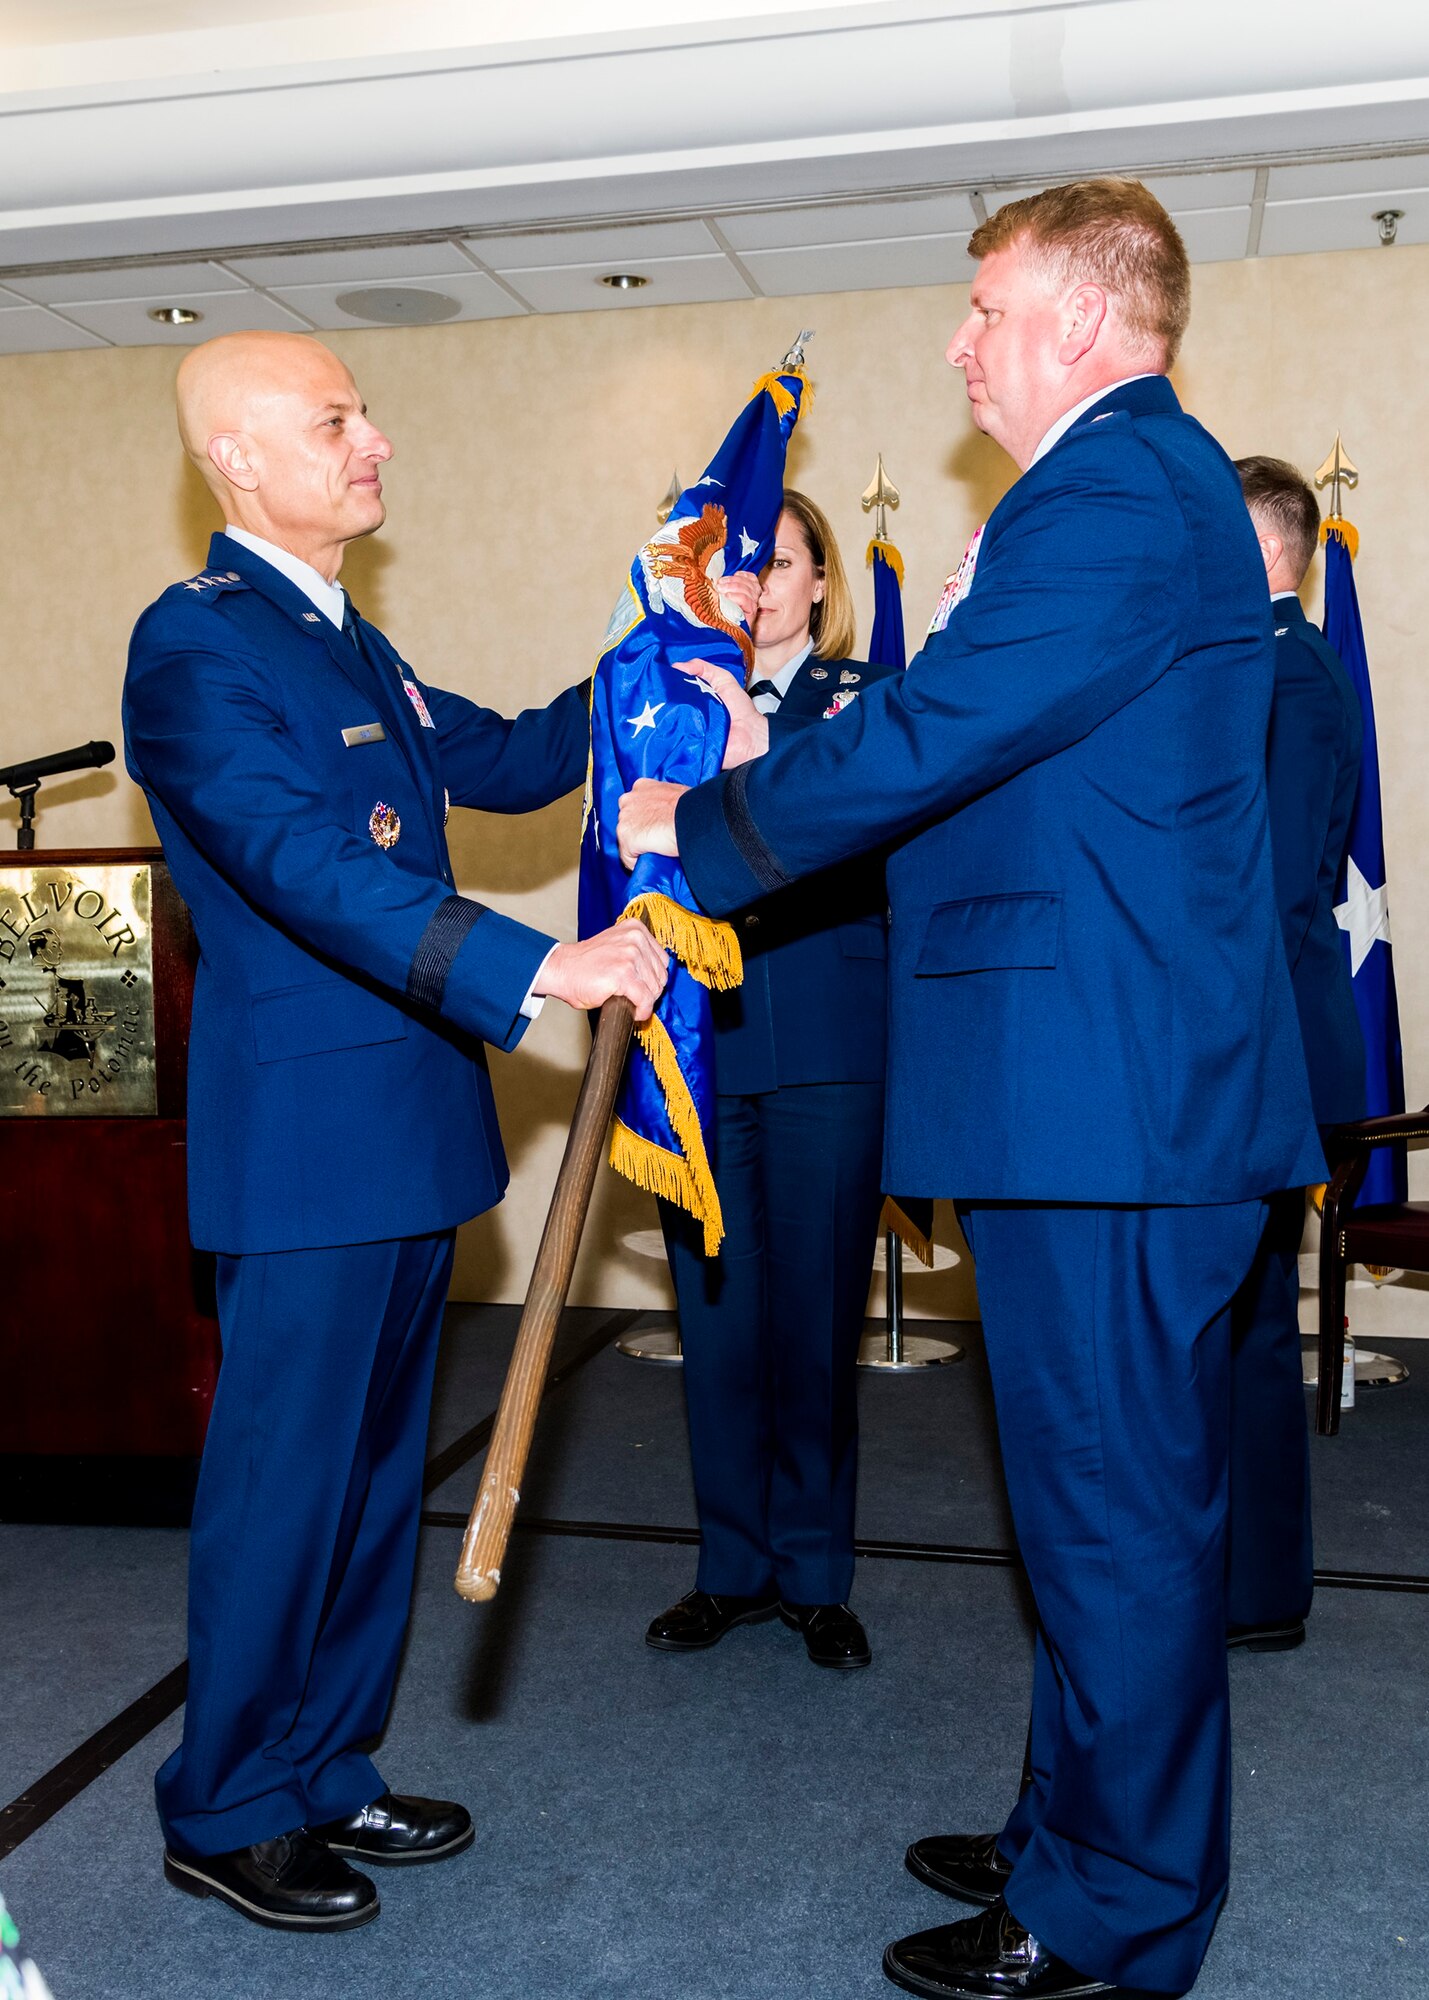 Brig. Gen. Terry L Bullard accepts the Air Force Office of Special Investigations flag from Lt. Gen. Sami D. Said, The Inspector General of the Air Force, during AFOSI's Change of Command Ceremony, May 16, 2019. General Bullard is the 19th Commander in the 70-year history of AFOSI. (U.S. Air Force photo by Mr. Michael Hastings)